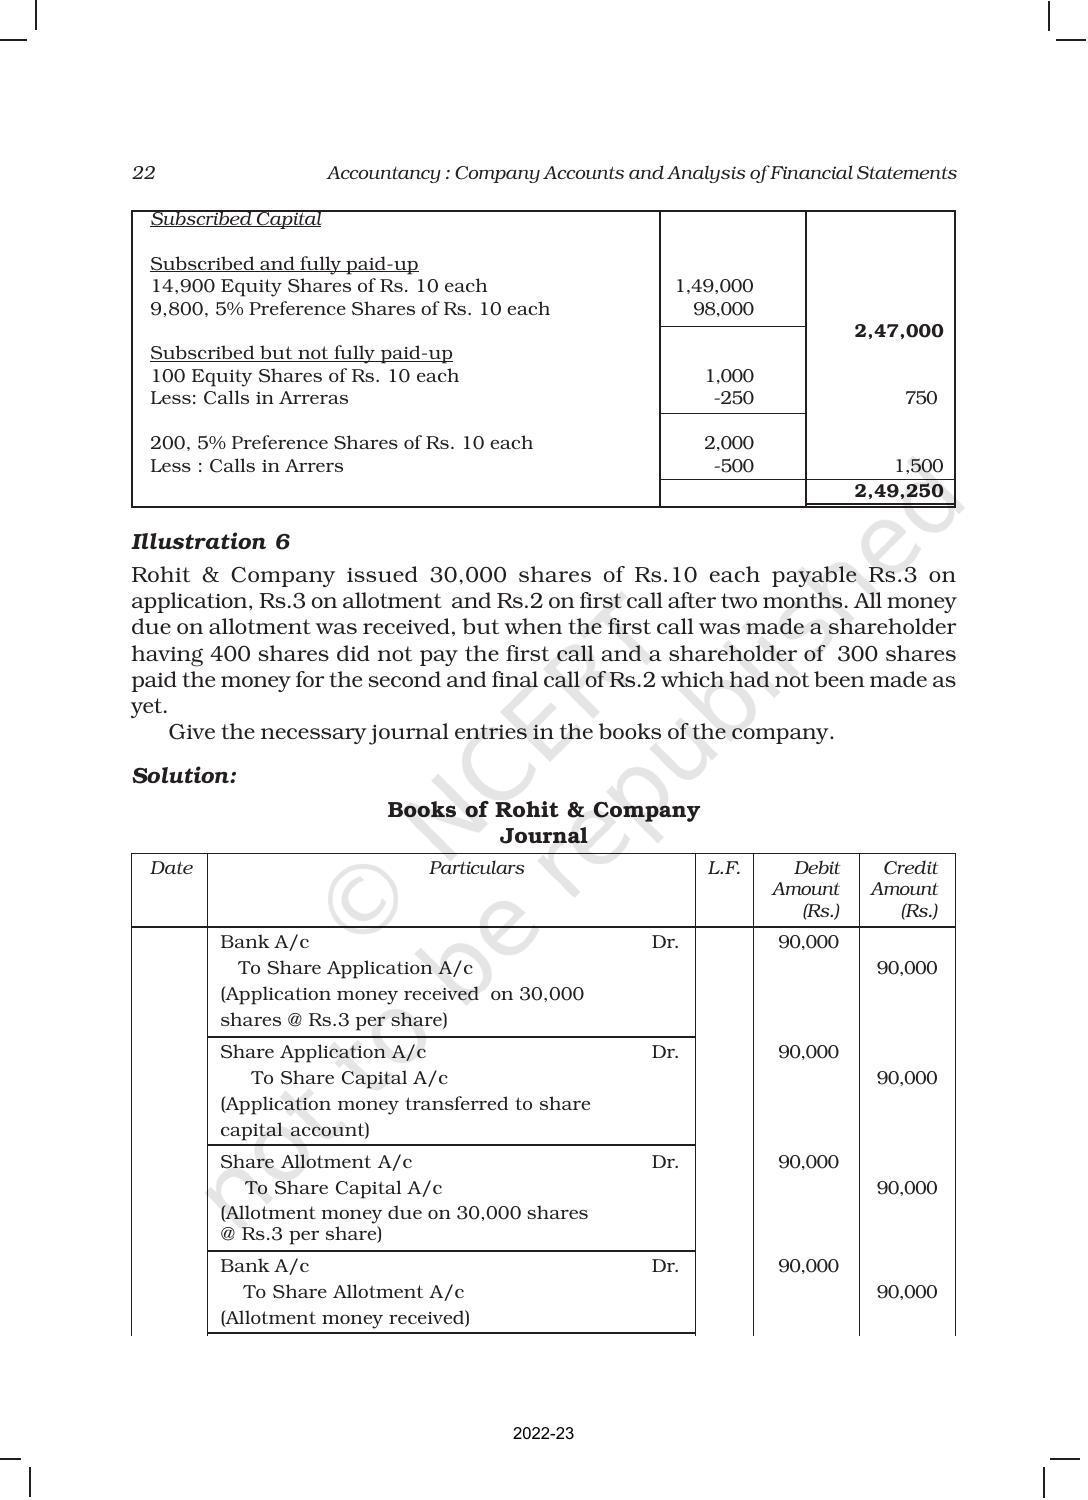 NCERT Book for Class 12 Accountancy Part II Chapter 1 Accounting for Share Capital - Page 22